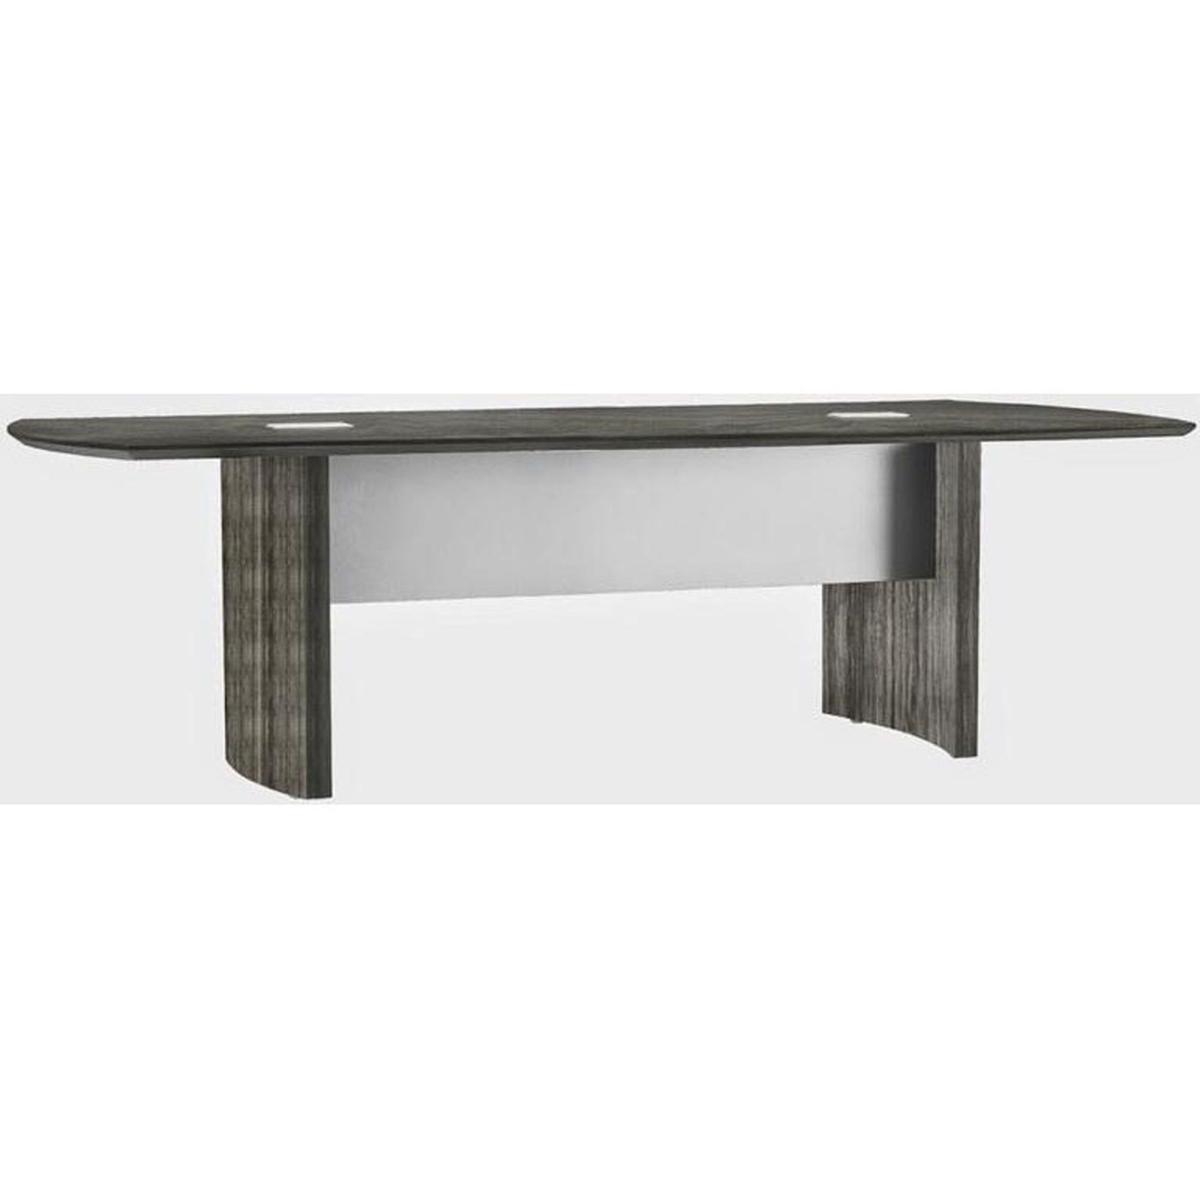 10 ft. Medina Conference Table - Laminate Gray Steel - 29.5 x 120 x 48 in -  Fine-line, FI2478749